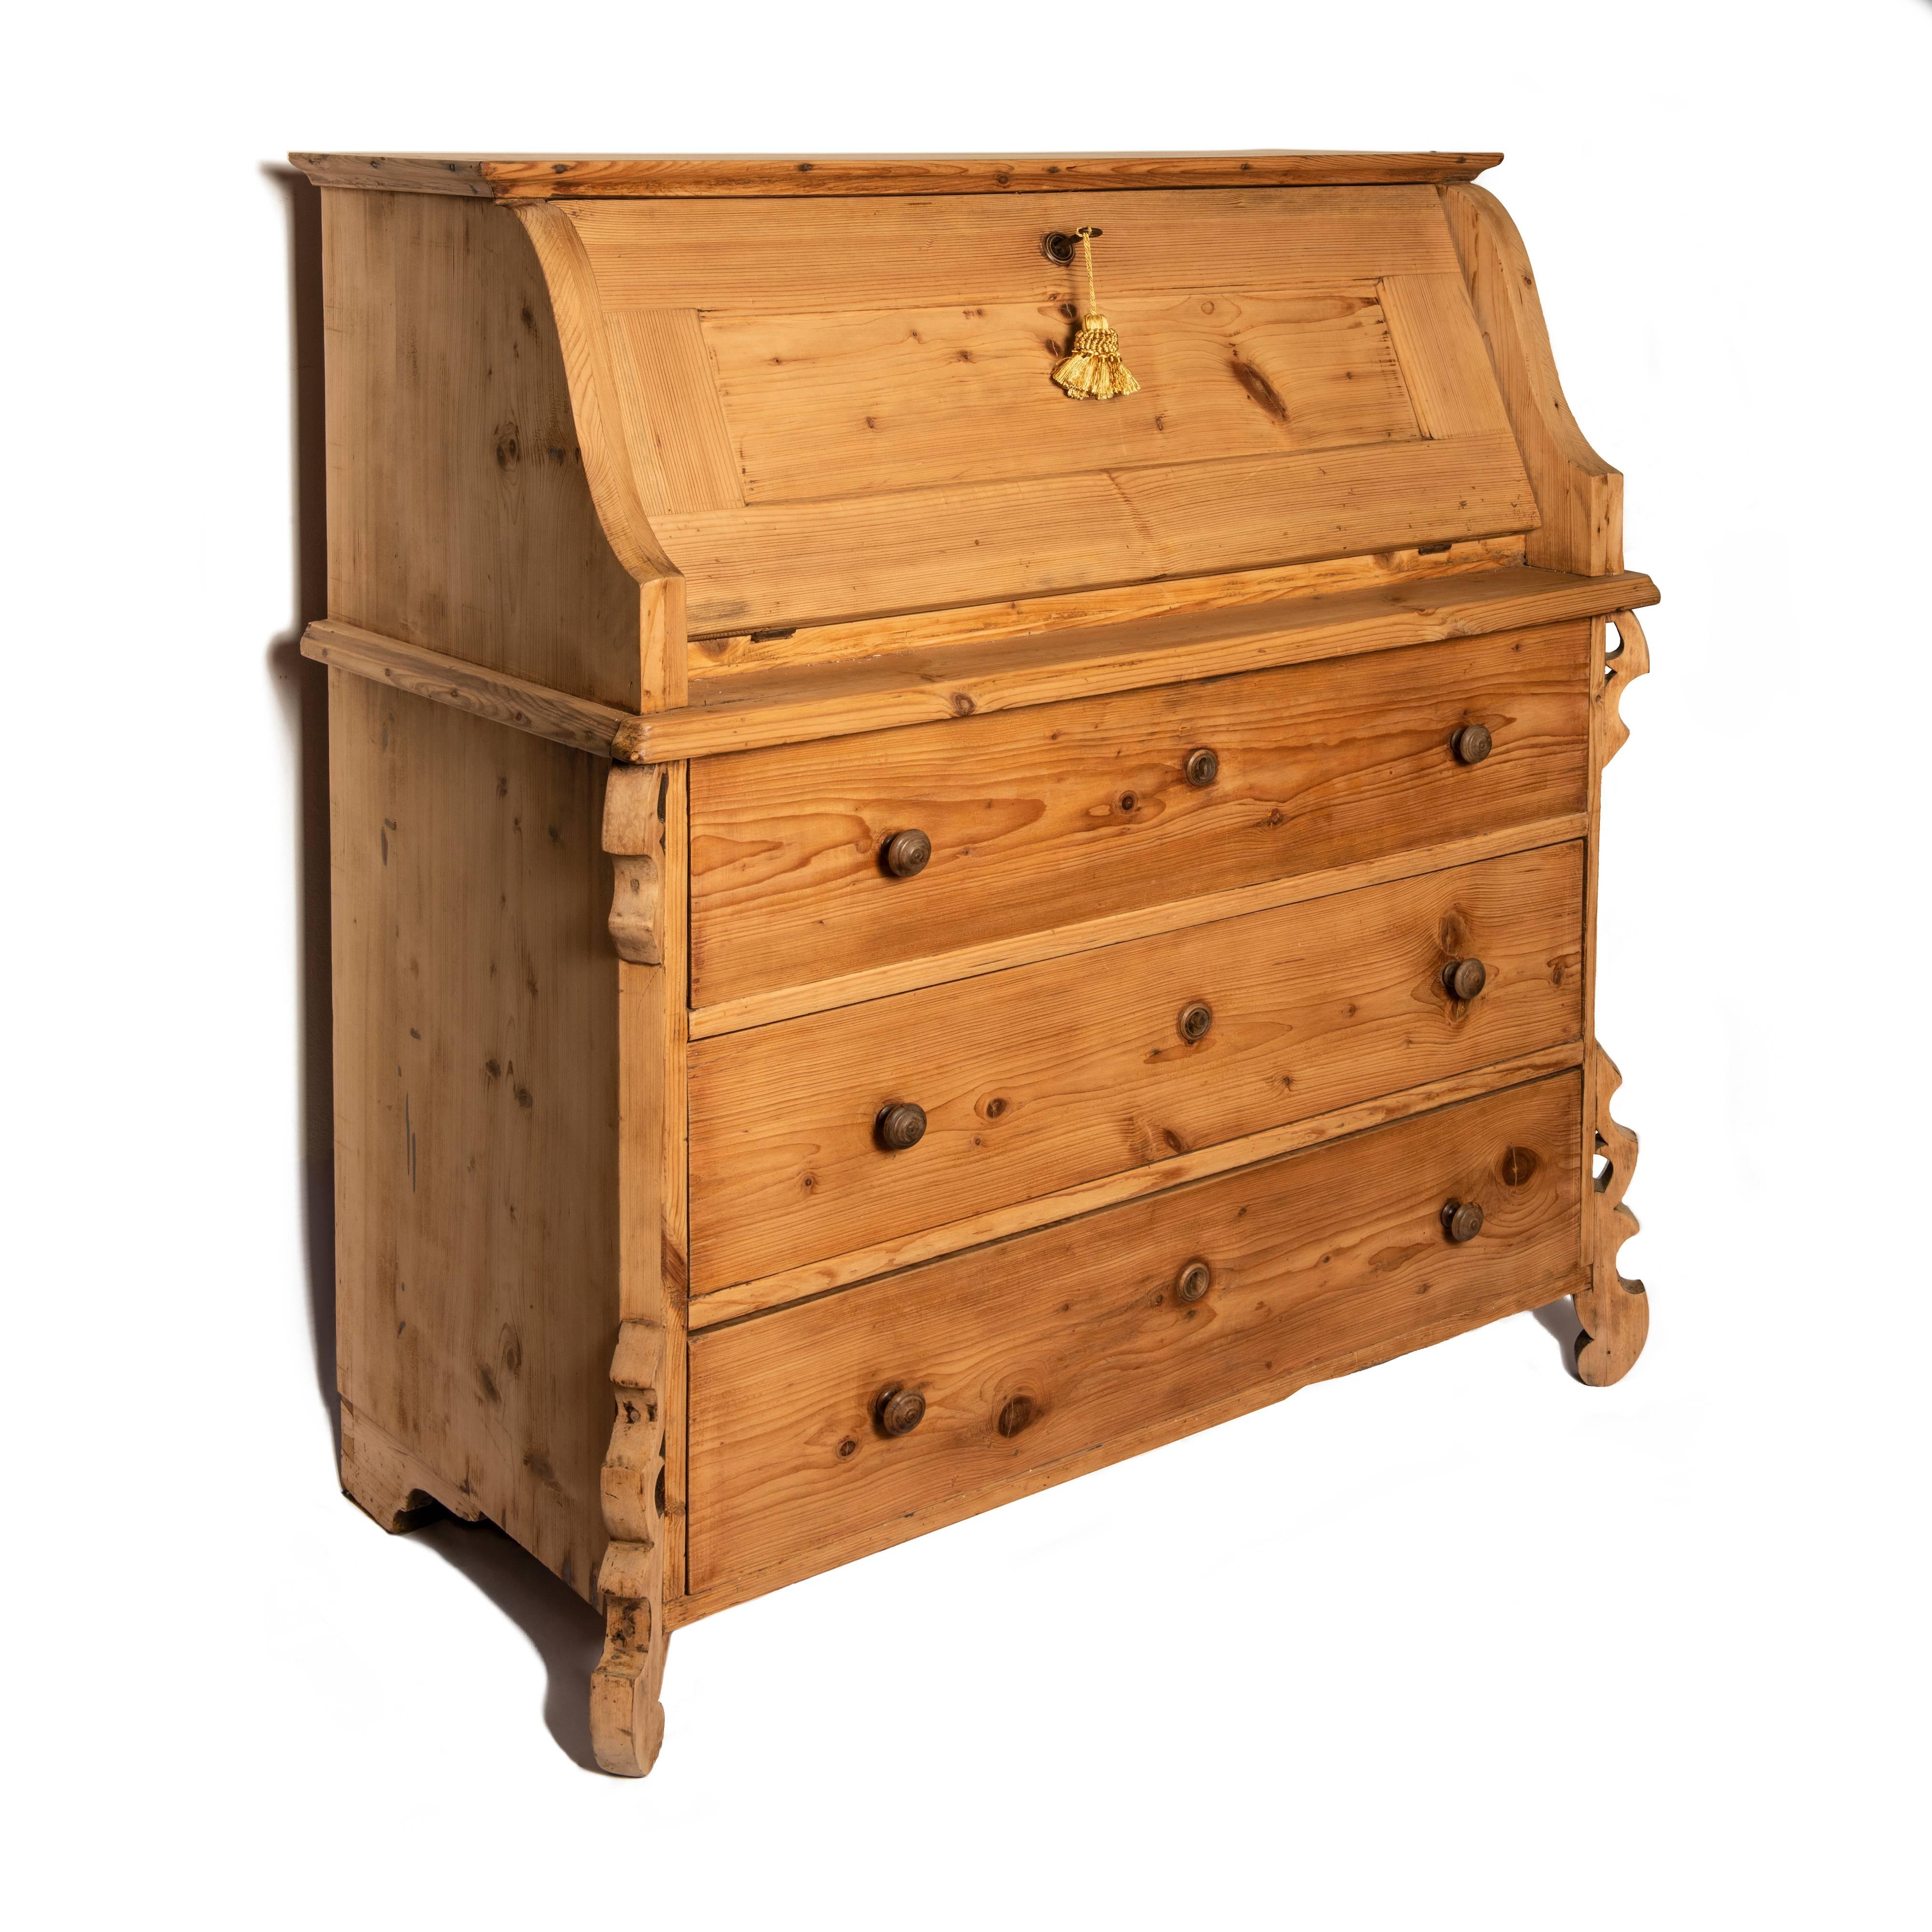 Carved 19th Century Louis Philippe Larch Drop-Front Bureau from Italian Alps Mountains